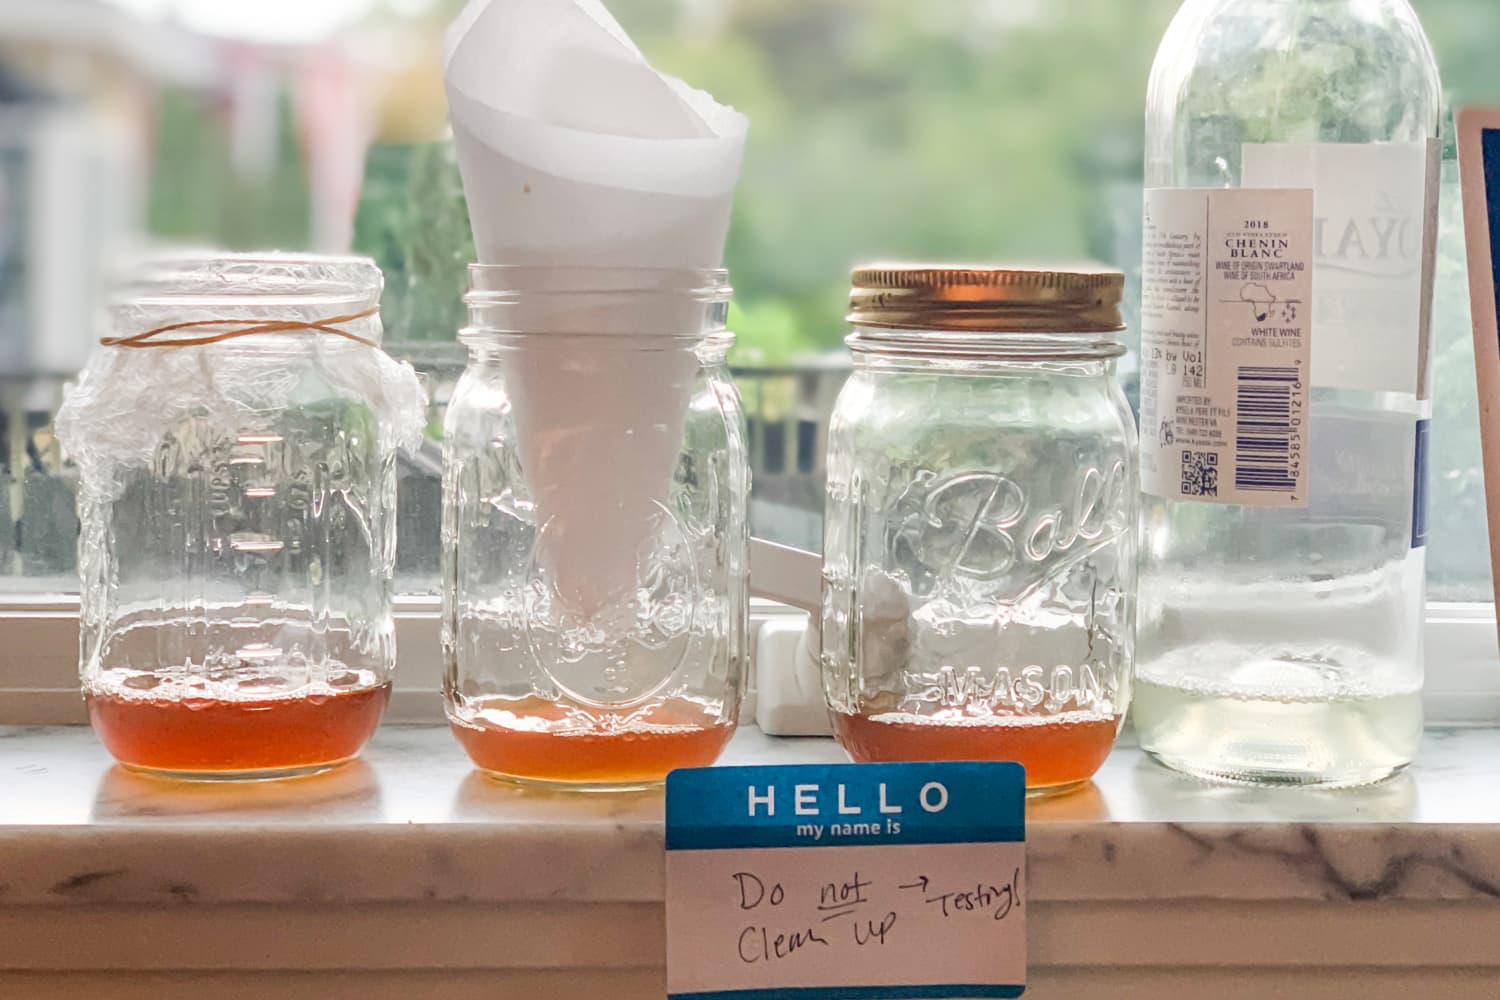 DIY Fruit Fly Trap {How to Get Rid of Fruit Flies!}